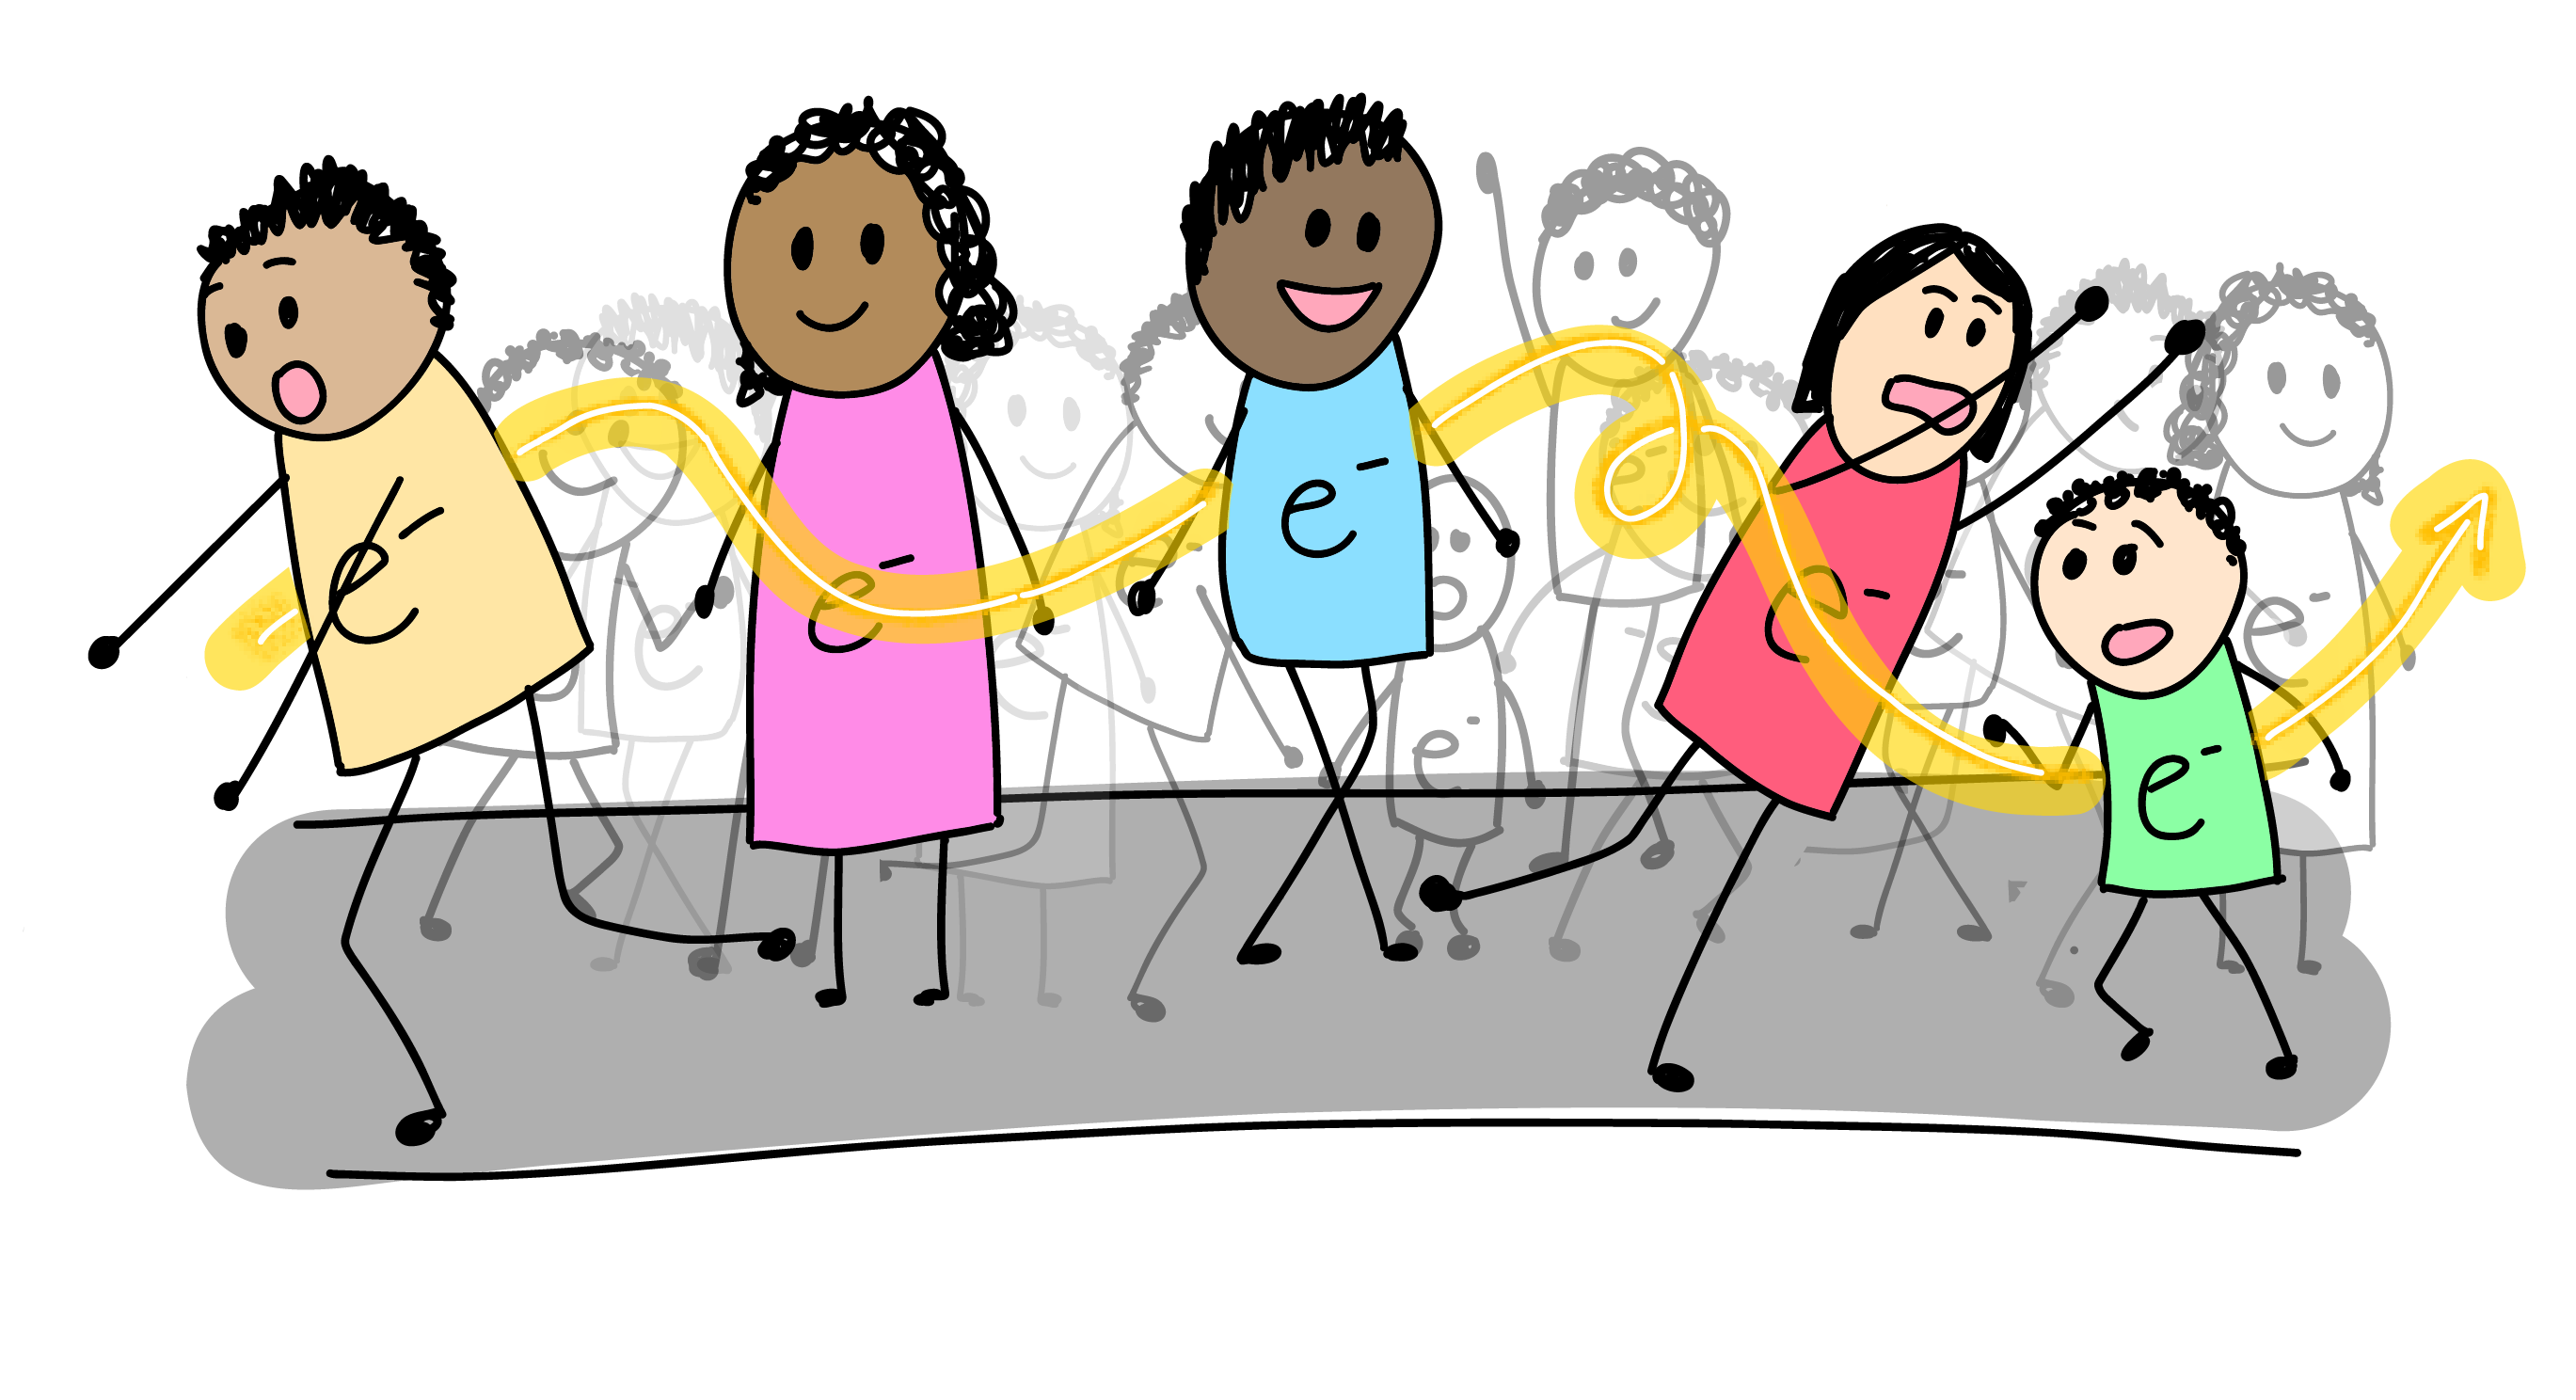 a cartoon of electrons (represented by stick figures wearing shirts with an 'e') on a crowded sidewalk